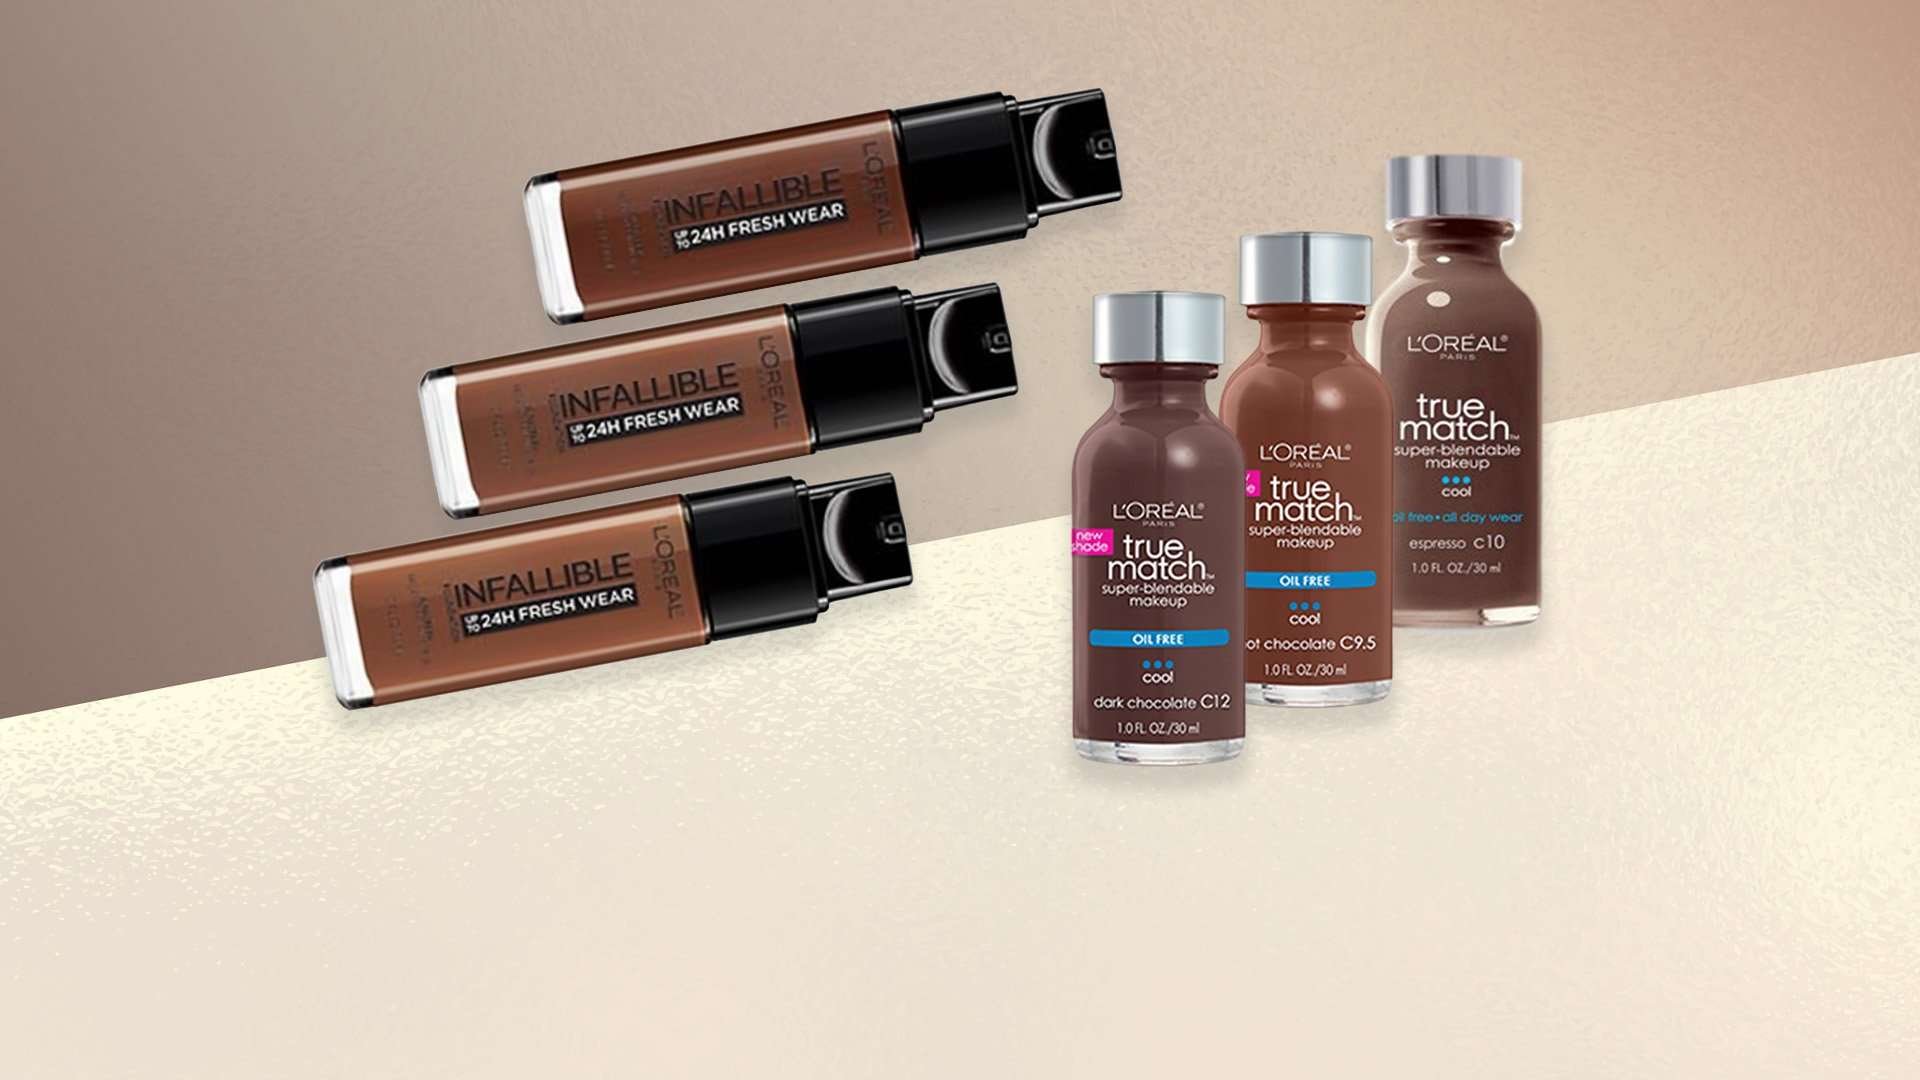 Loreal Paris Article Our Best Foundations For Dark Skin Tones And POC D